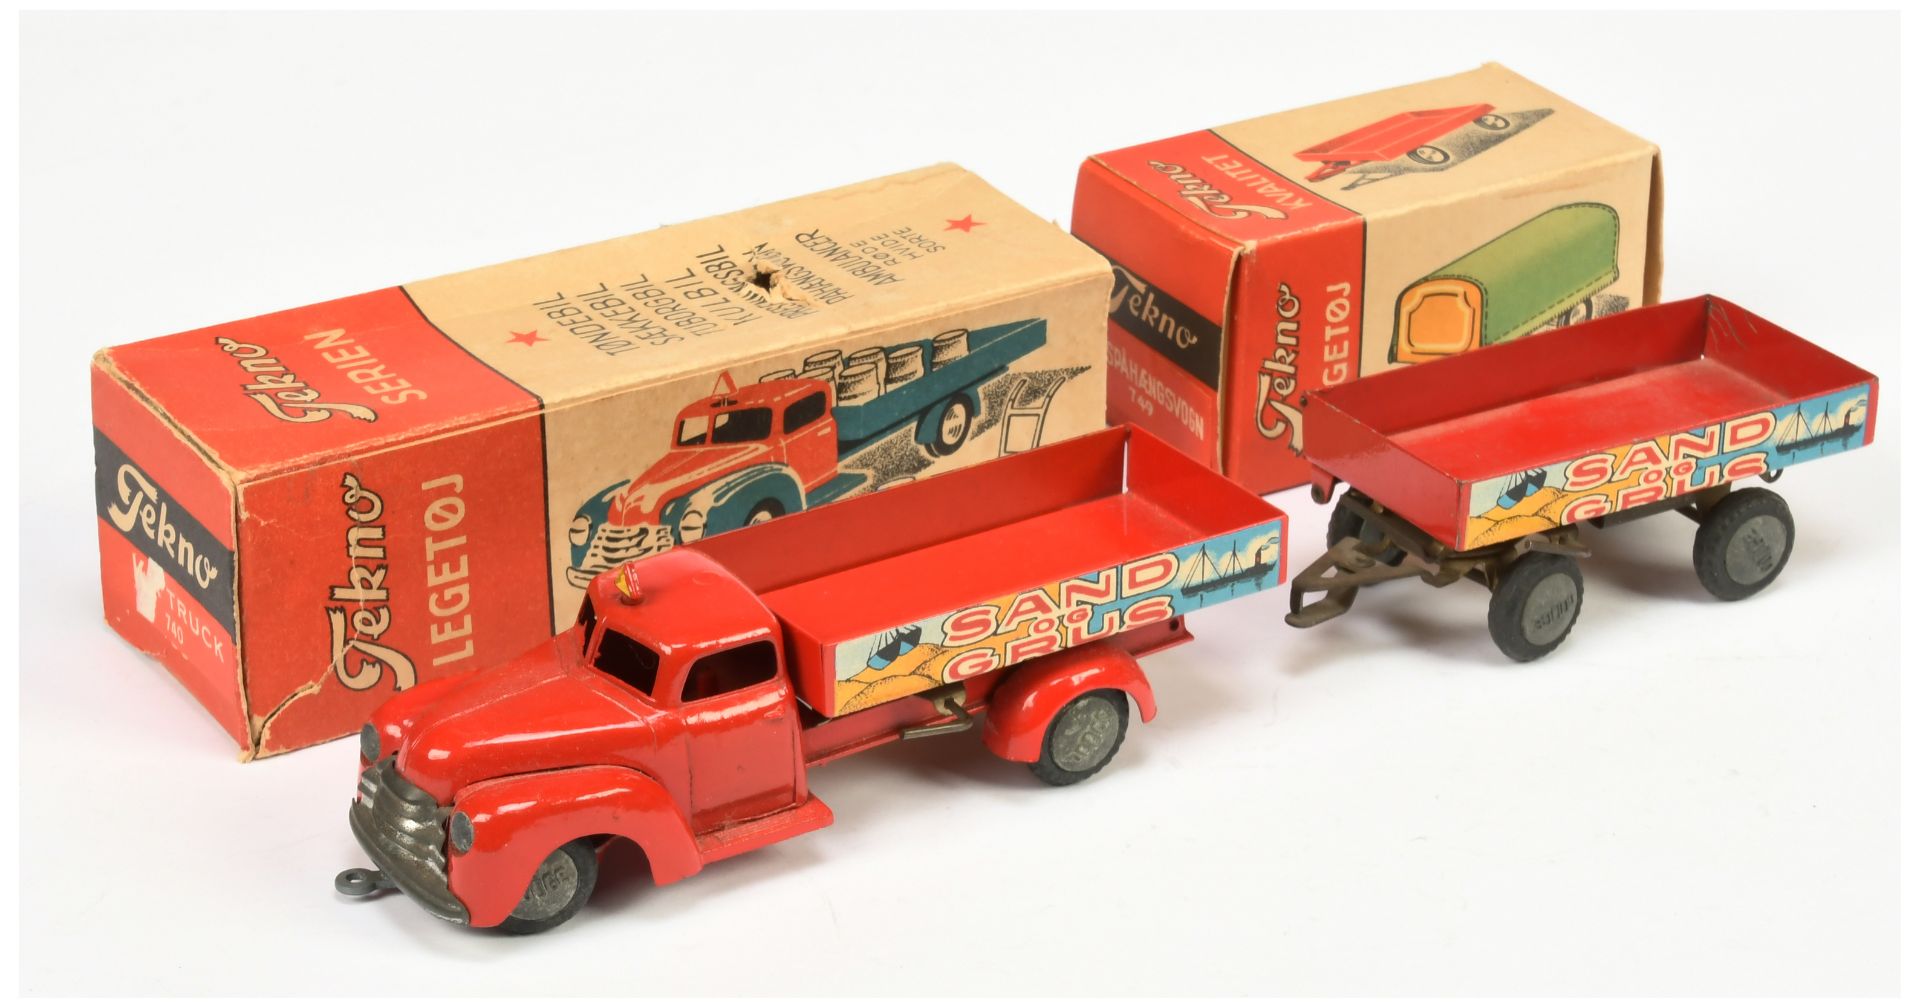 Tekno 750 Dodge "Sand & Gravel"  Delivery Truck - Red including back, chrome trim with 749 Matchi...